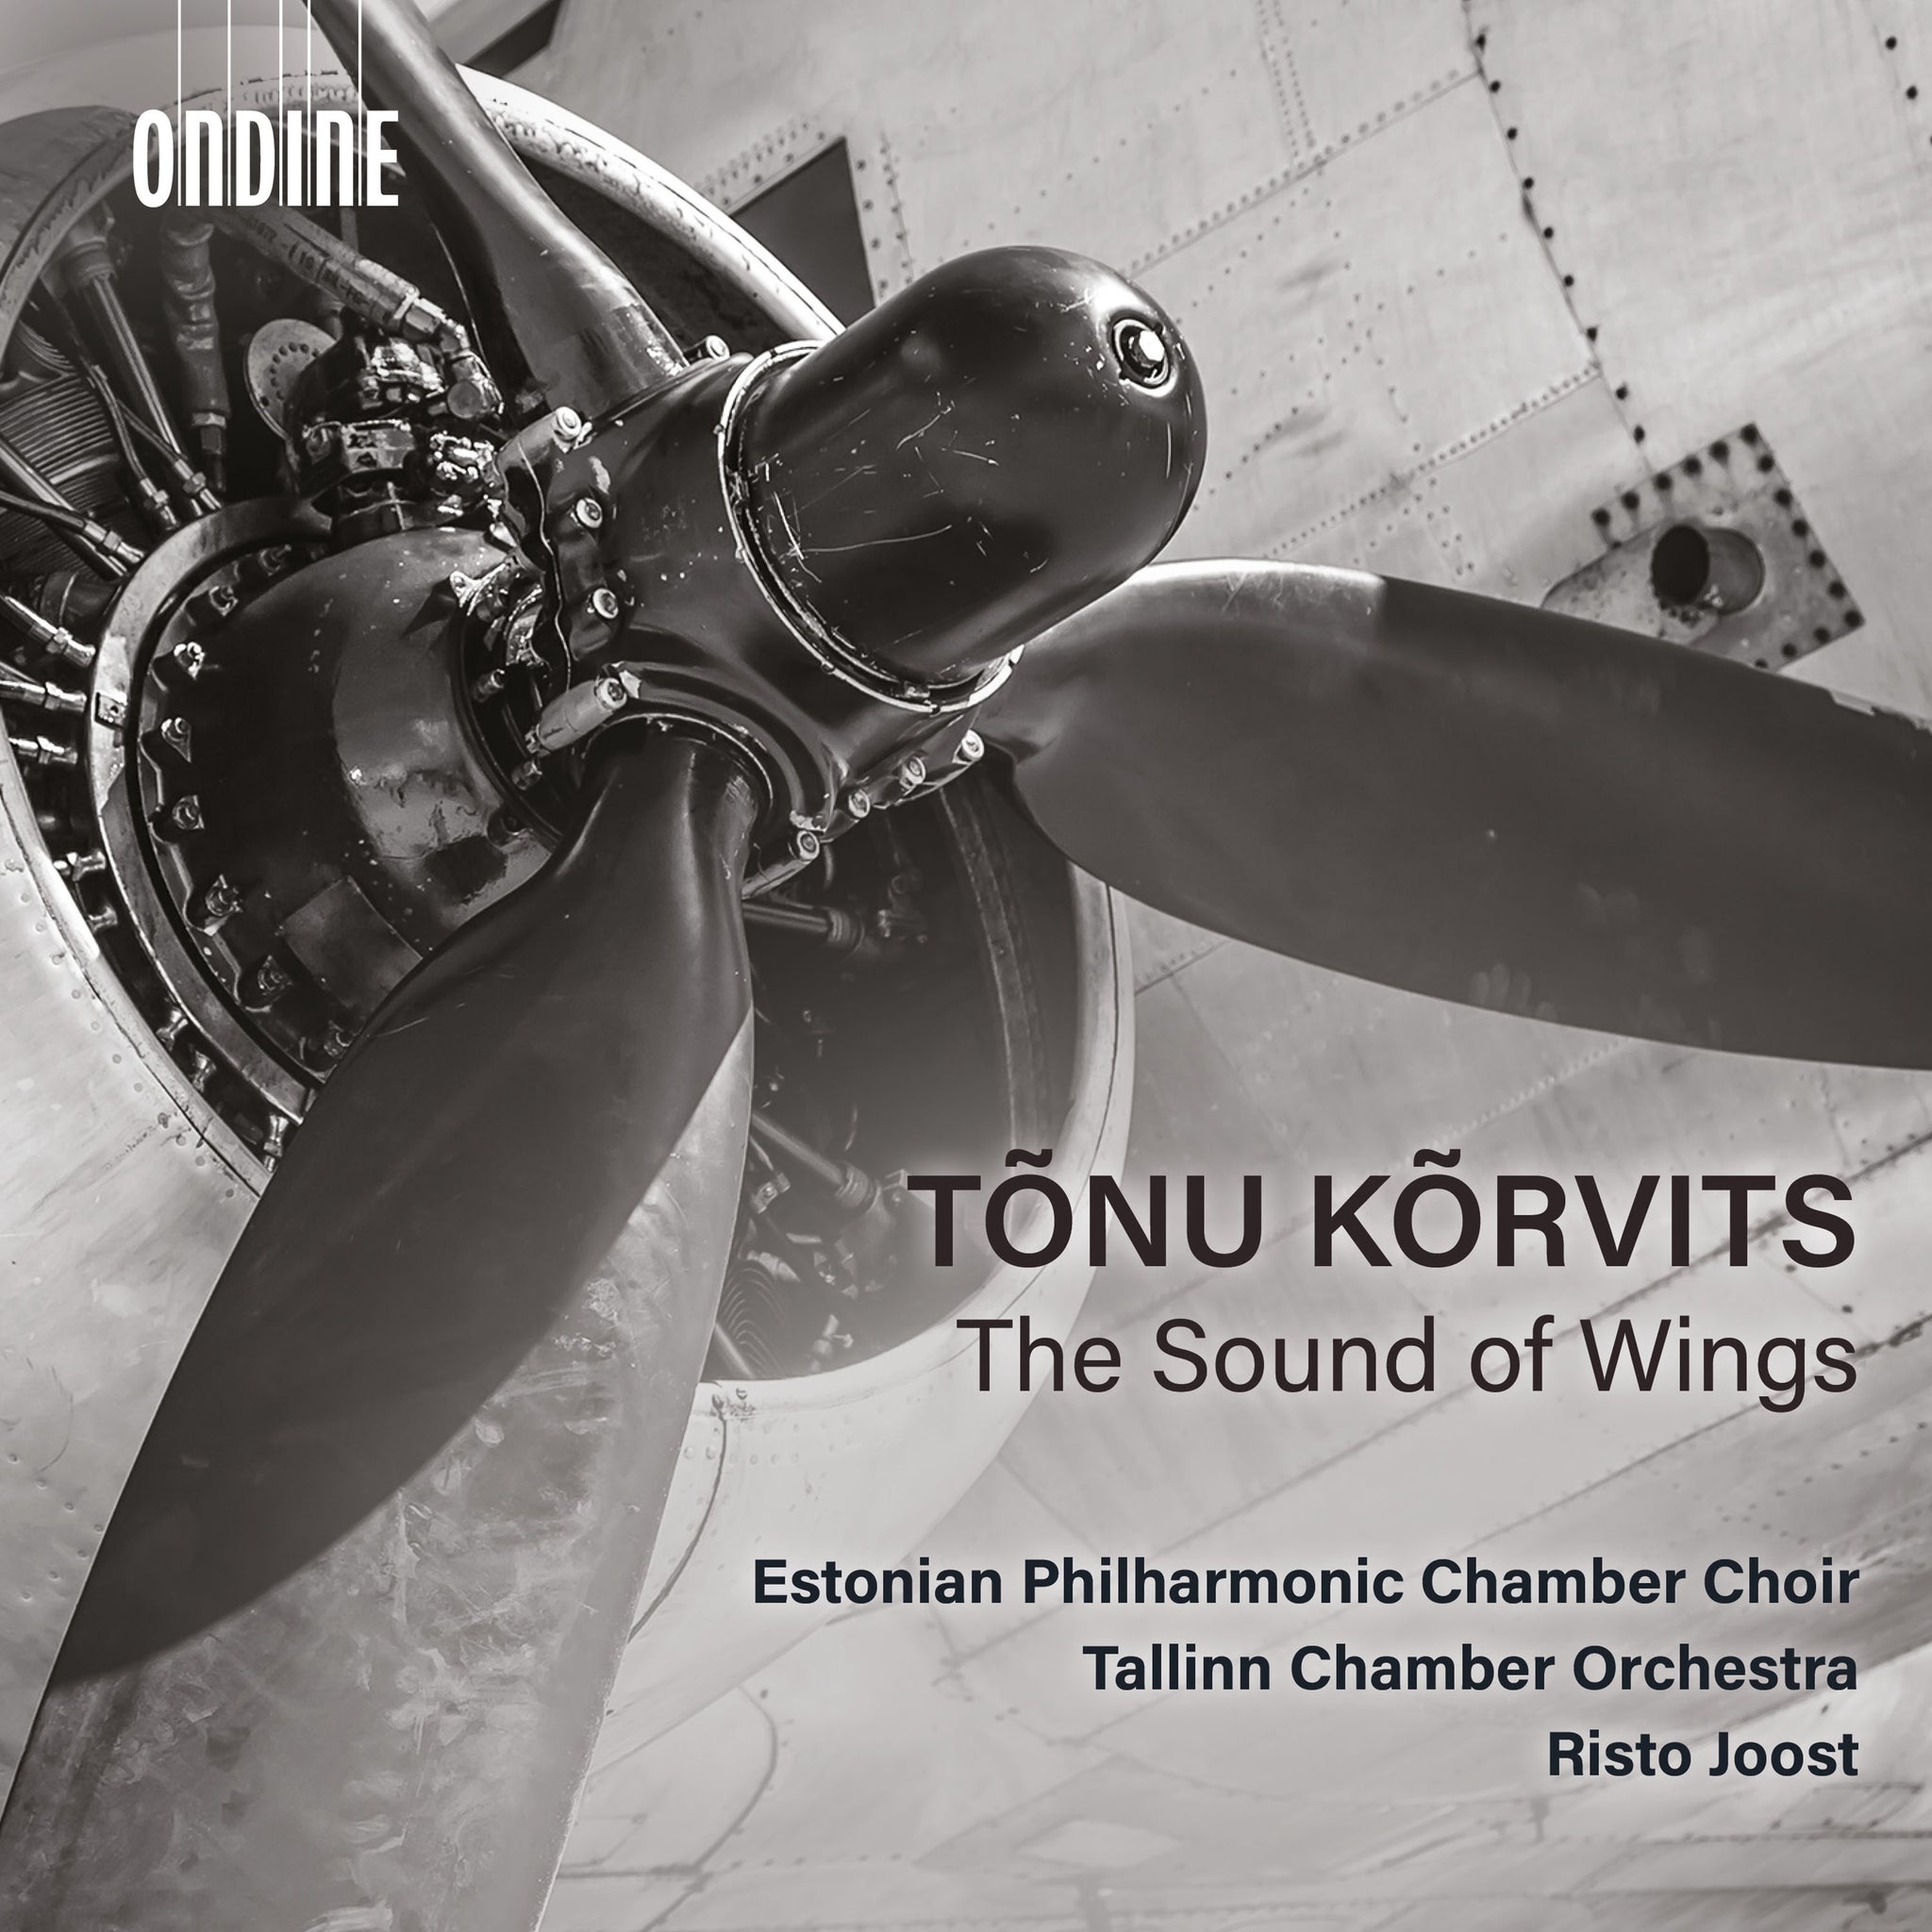 Kõrvits: The Sound of Wings / Joost, Tallinn Chamber Orchestra